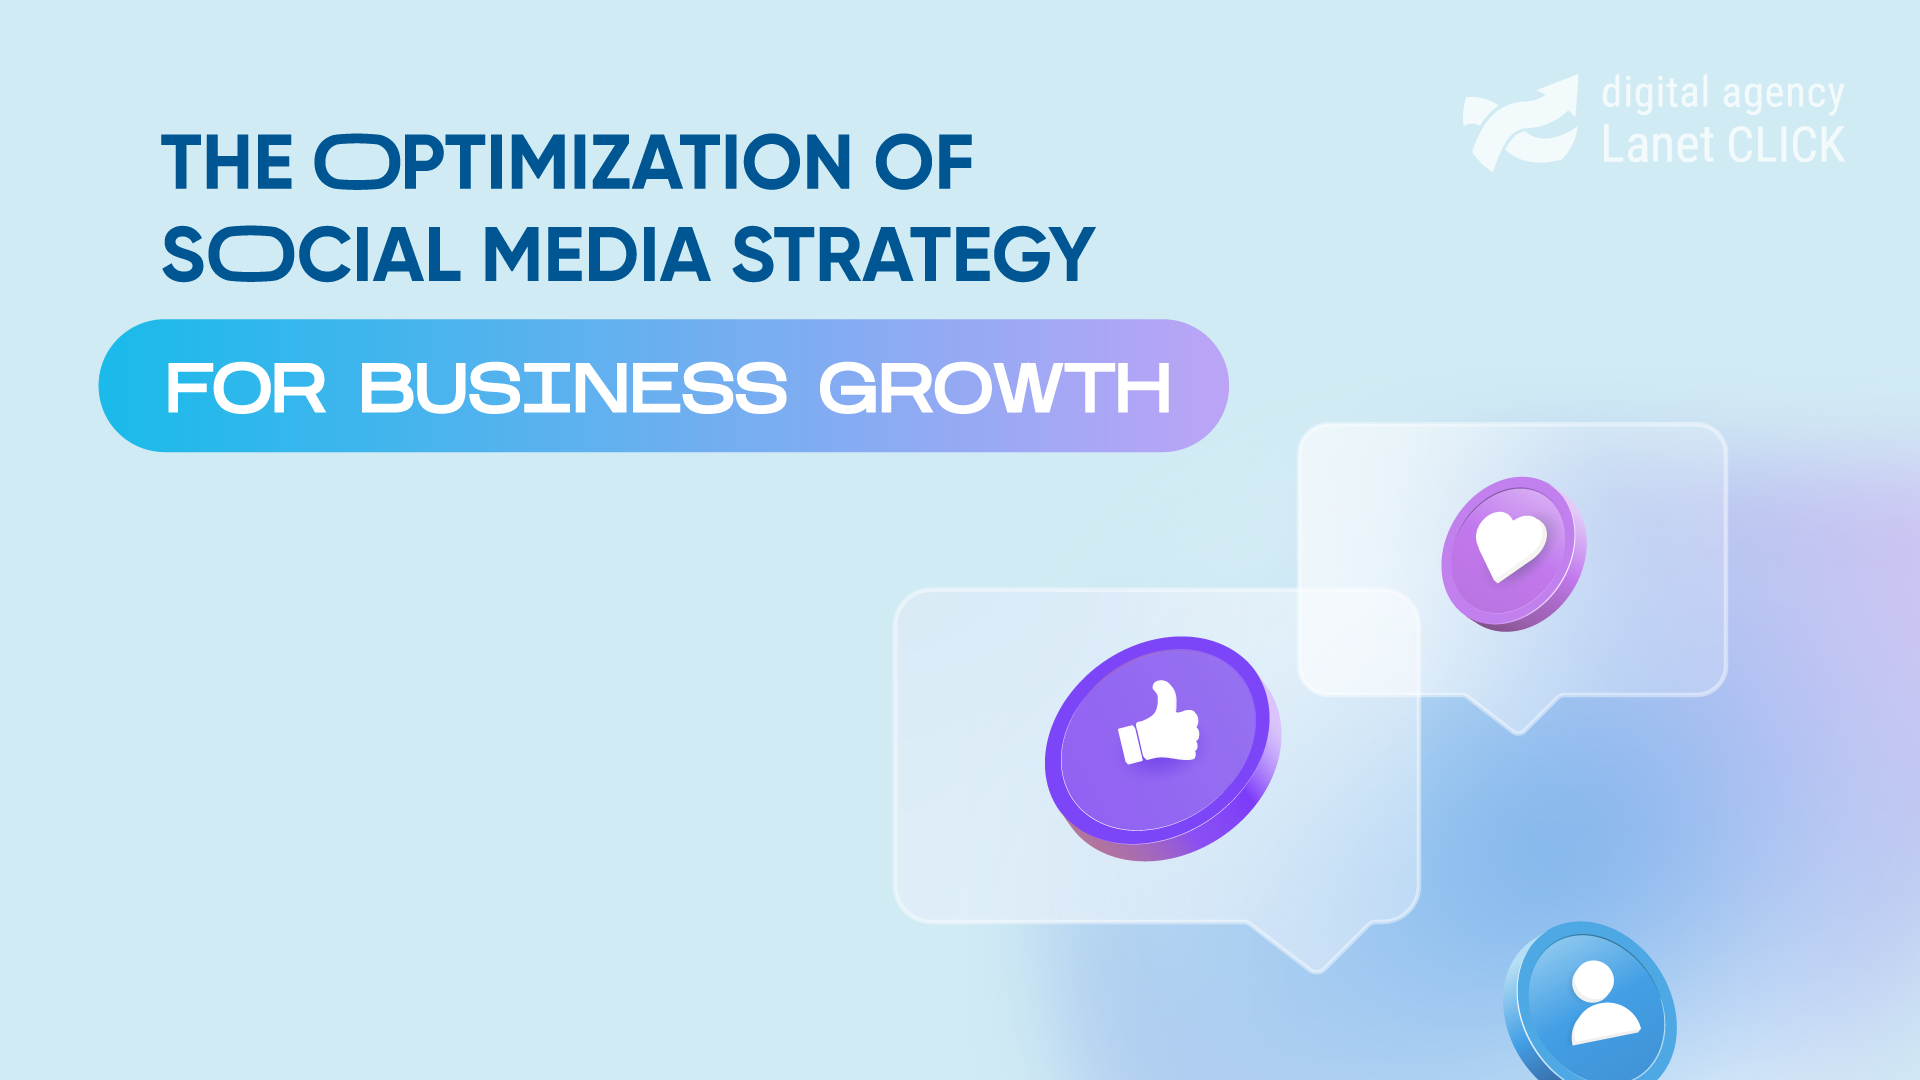 The optimization of social media strategy for business growth